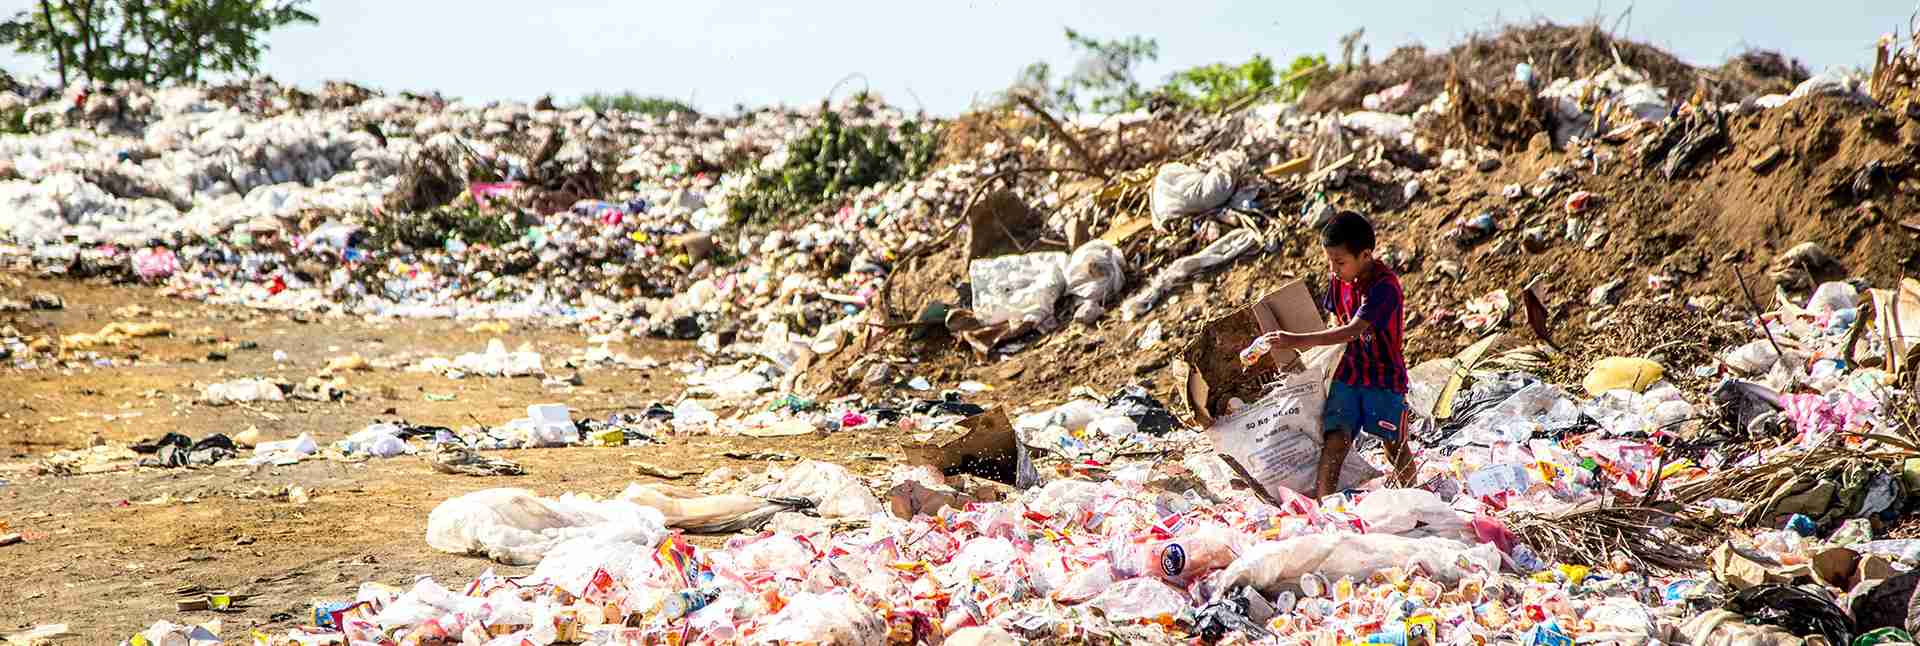 Quantum Consumer Solutions – colombo’s deadly garbage disaster